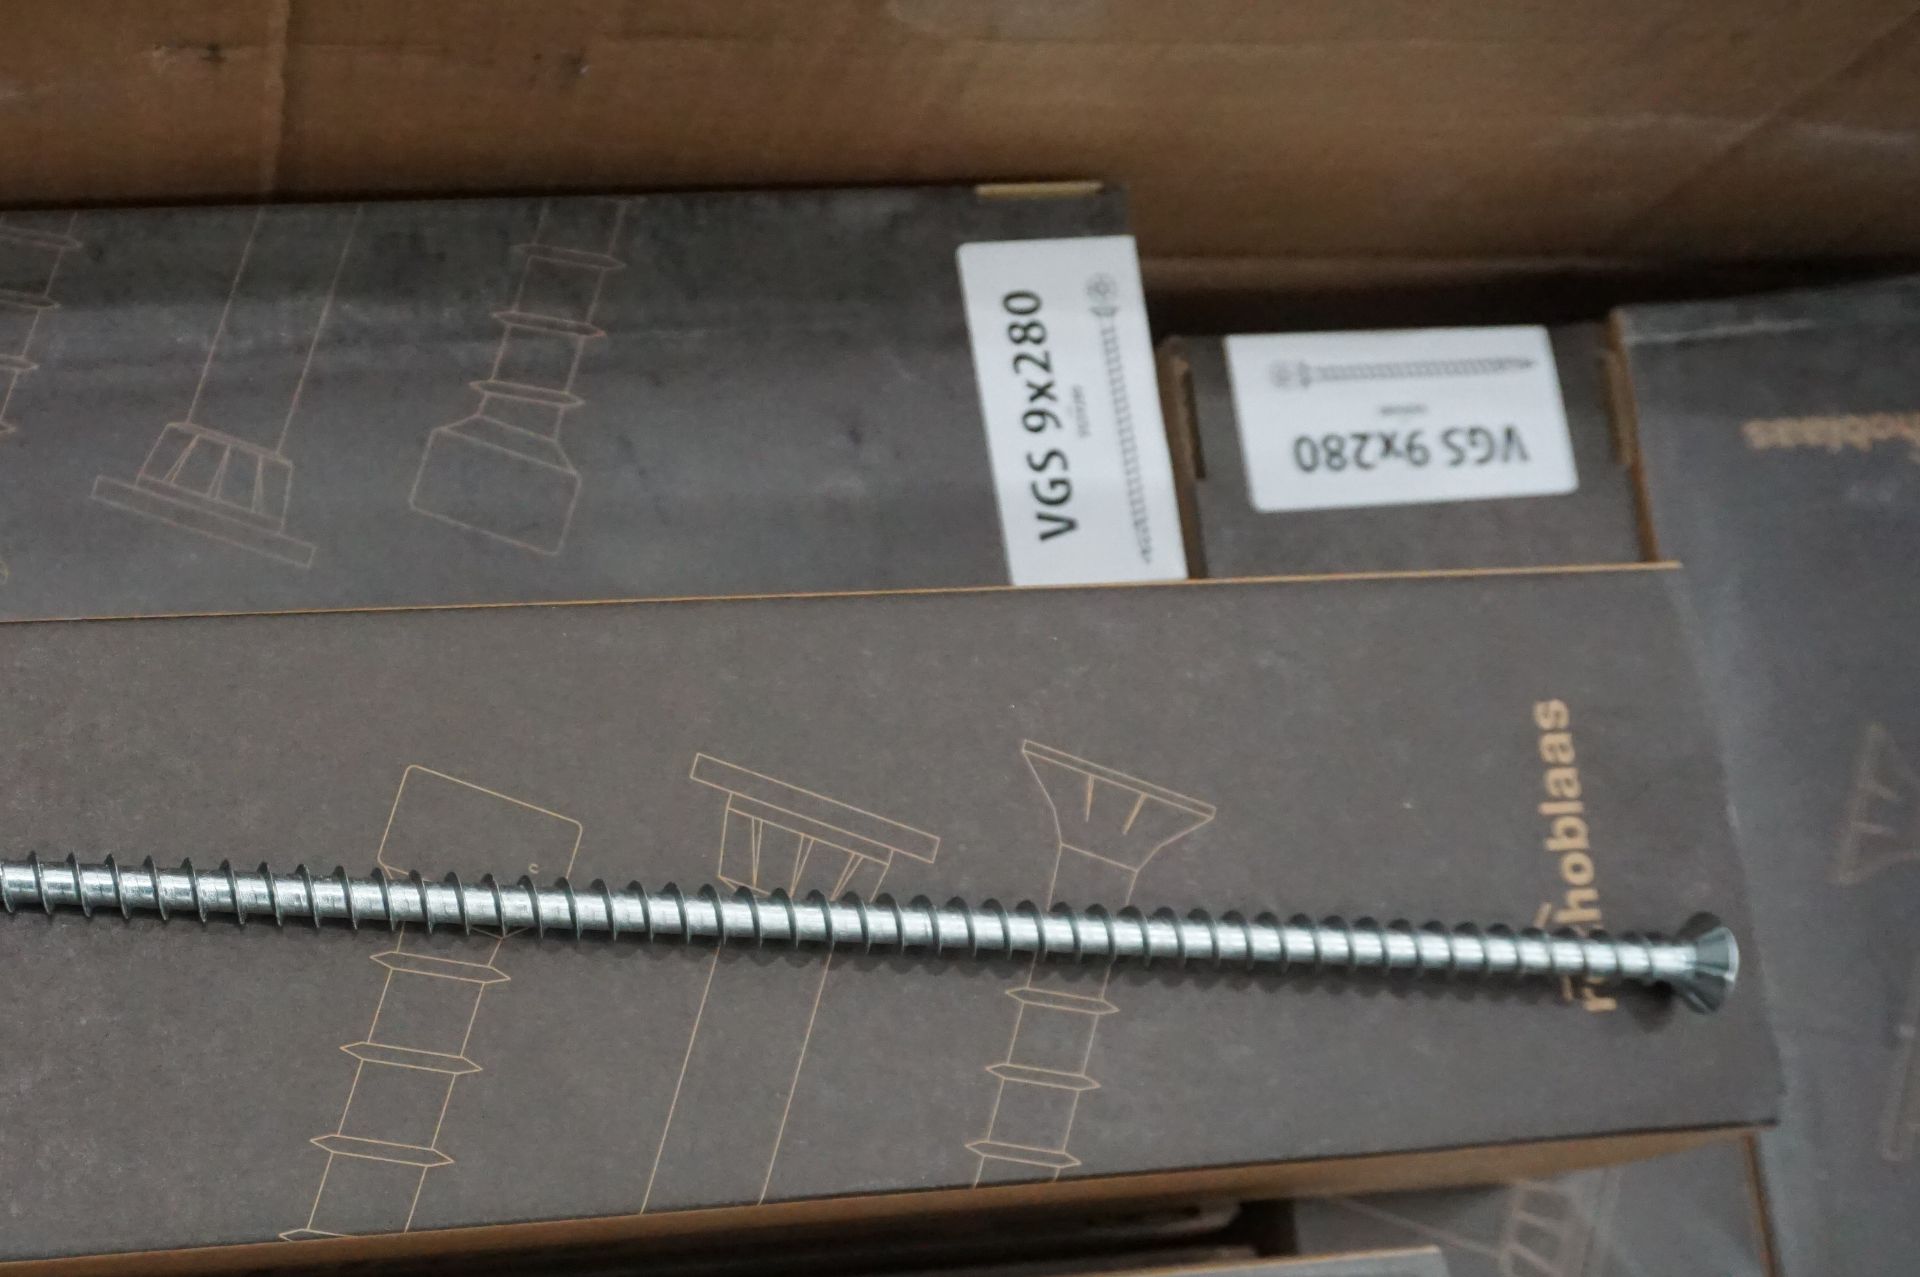 1x (no.) pallet box of Rothoblaas screws to include VGS 9 x 280mm self tapping wood screws qty 1500 - Image 4 of 5